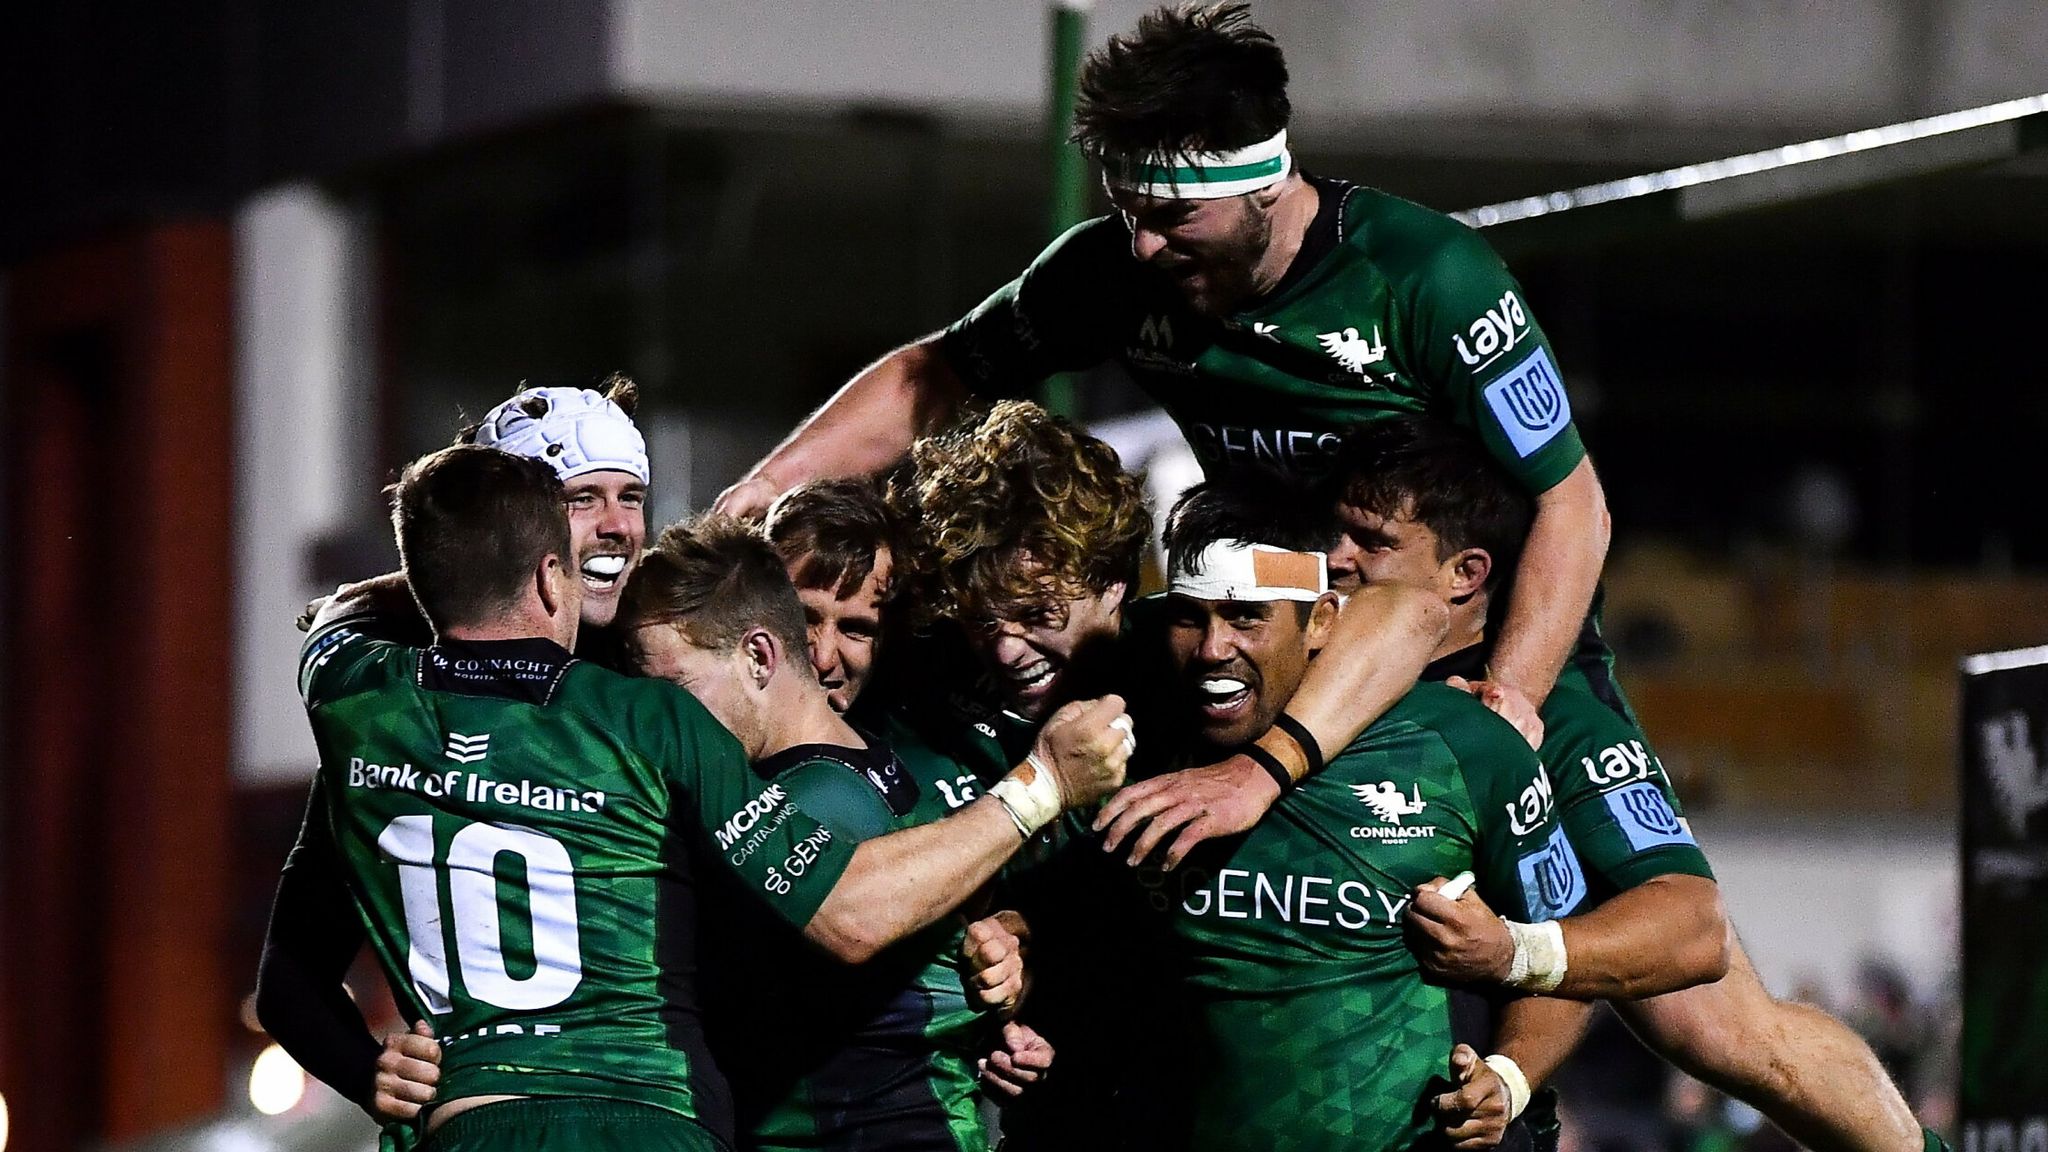 United Rugby Championship Connacht batter Bulls; Scarlets comfortably beat Lions Rugby Union News Sky Sports